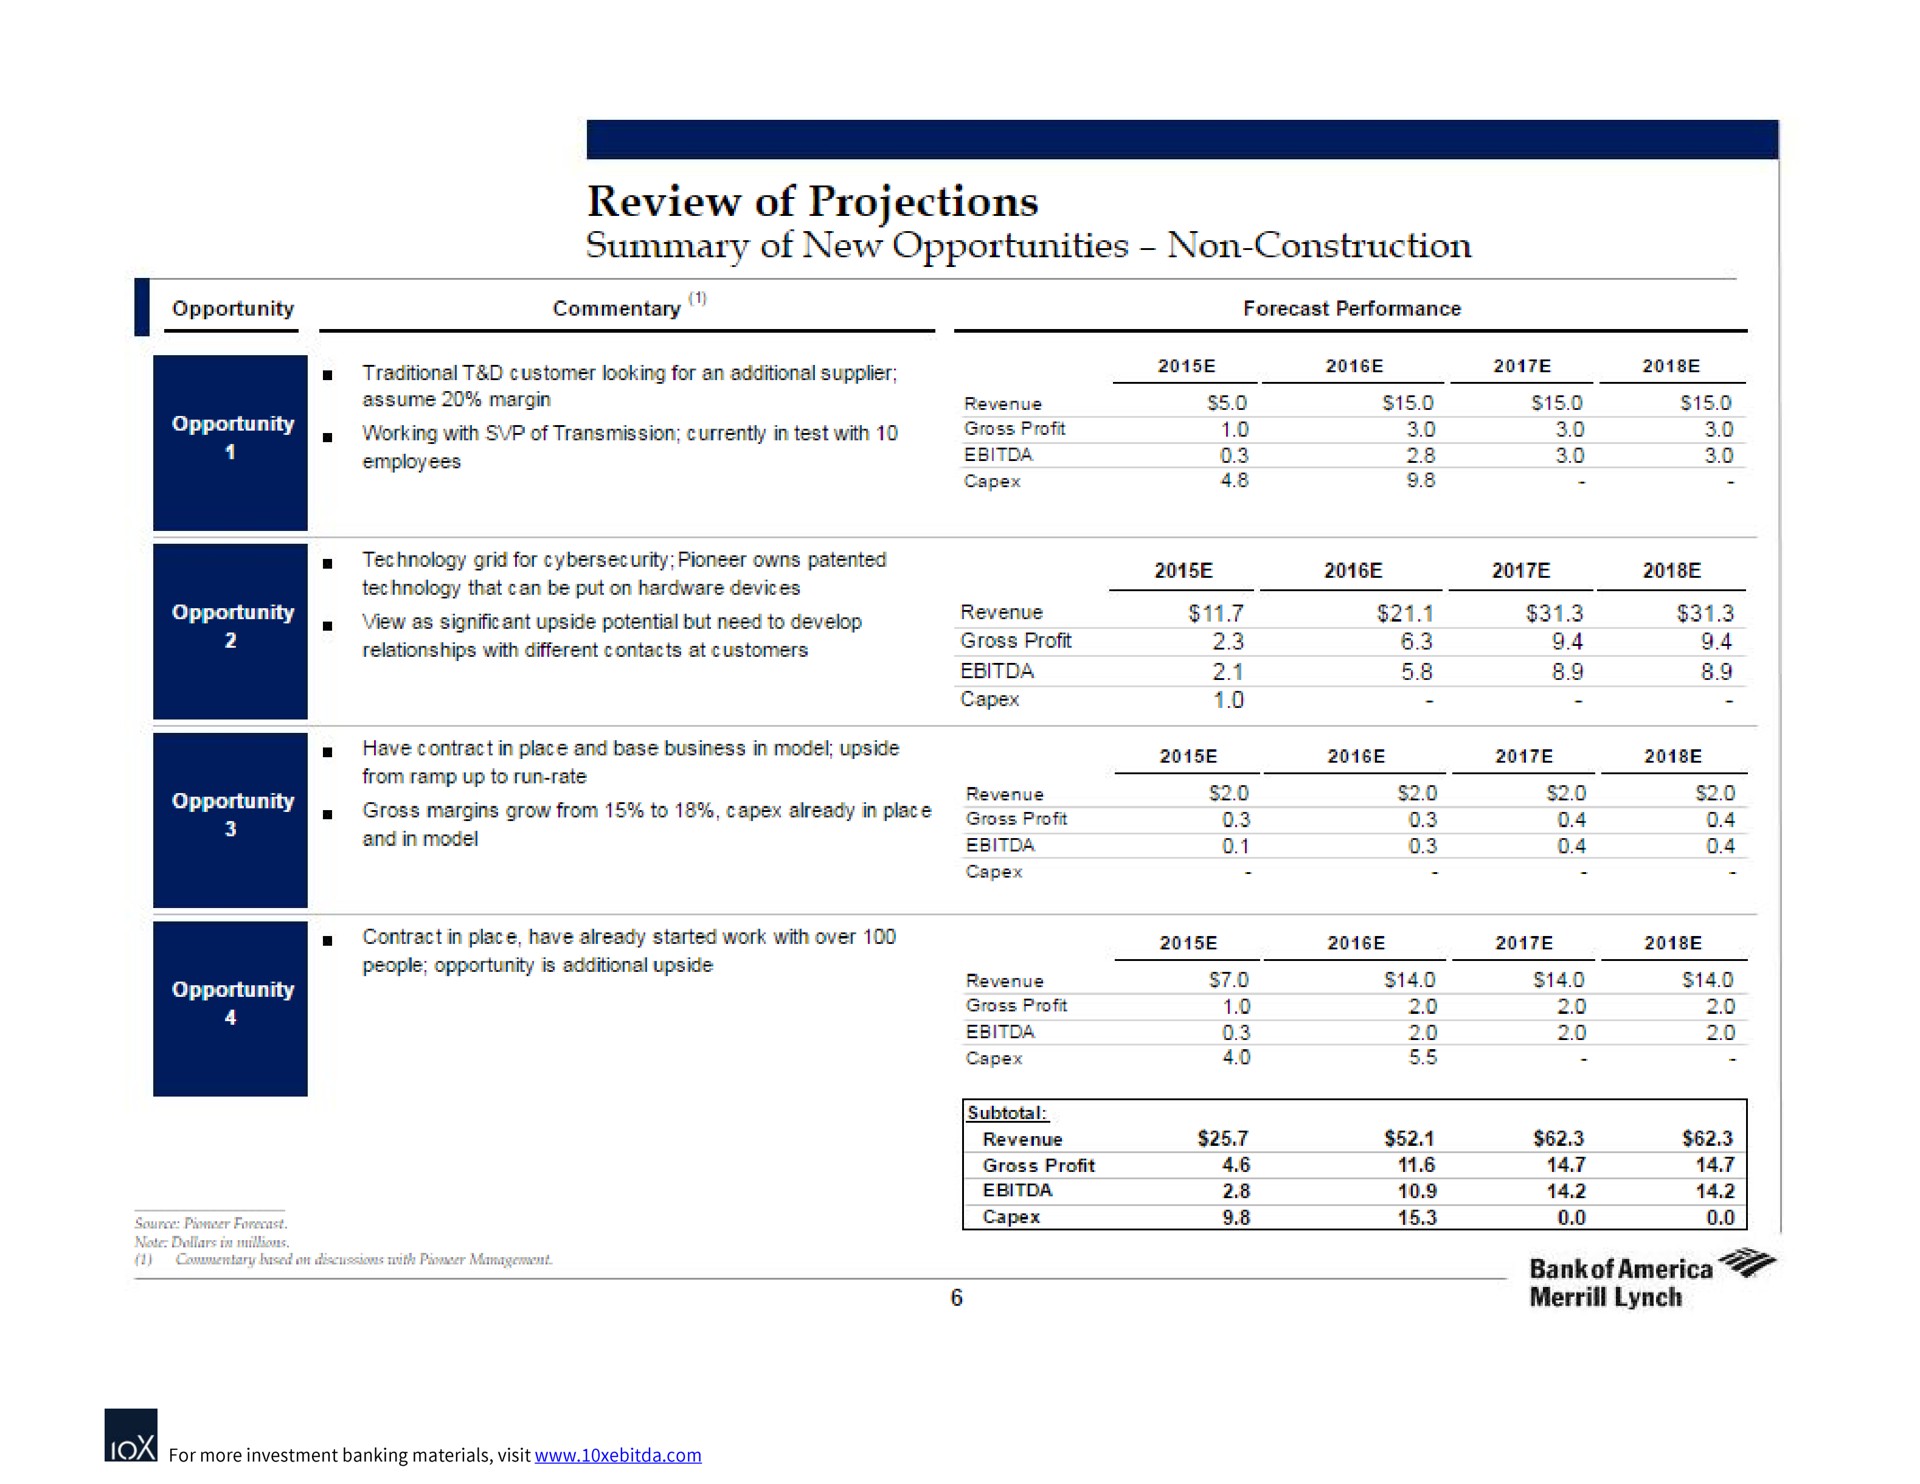 review of projections summary of new opportunities non construction | Bank of America